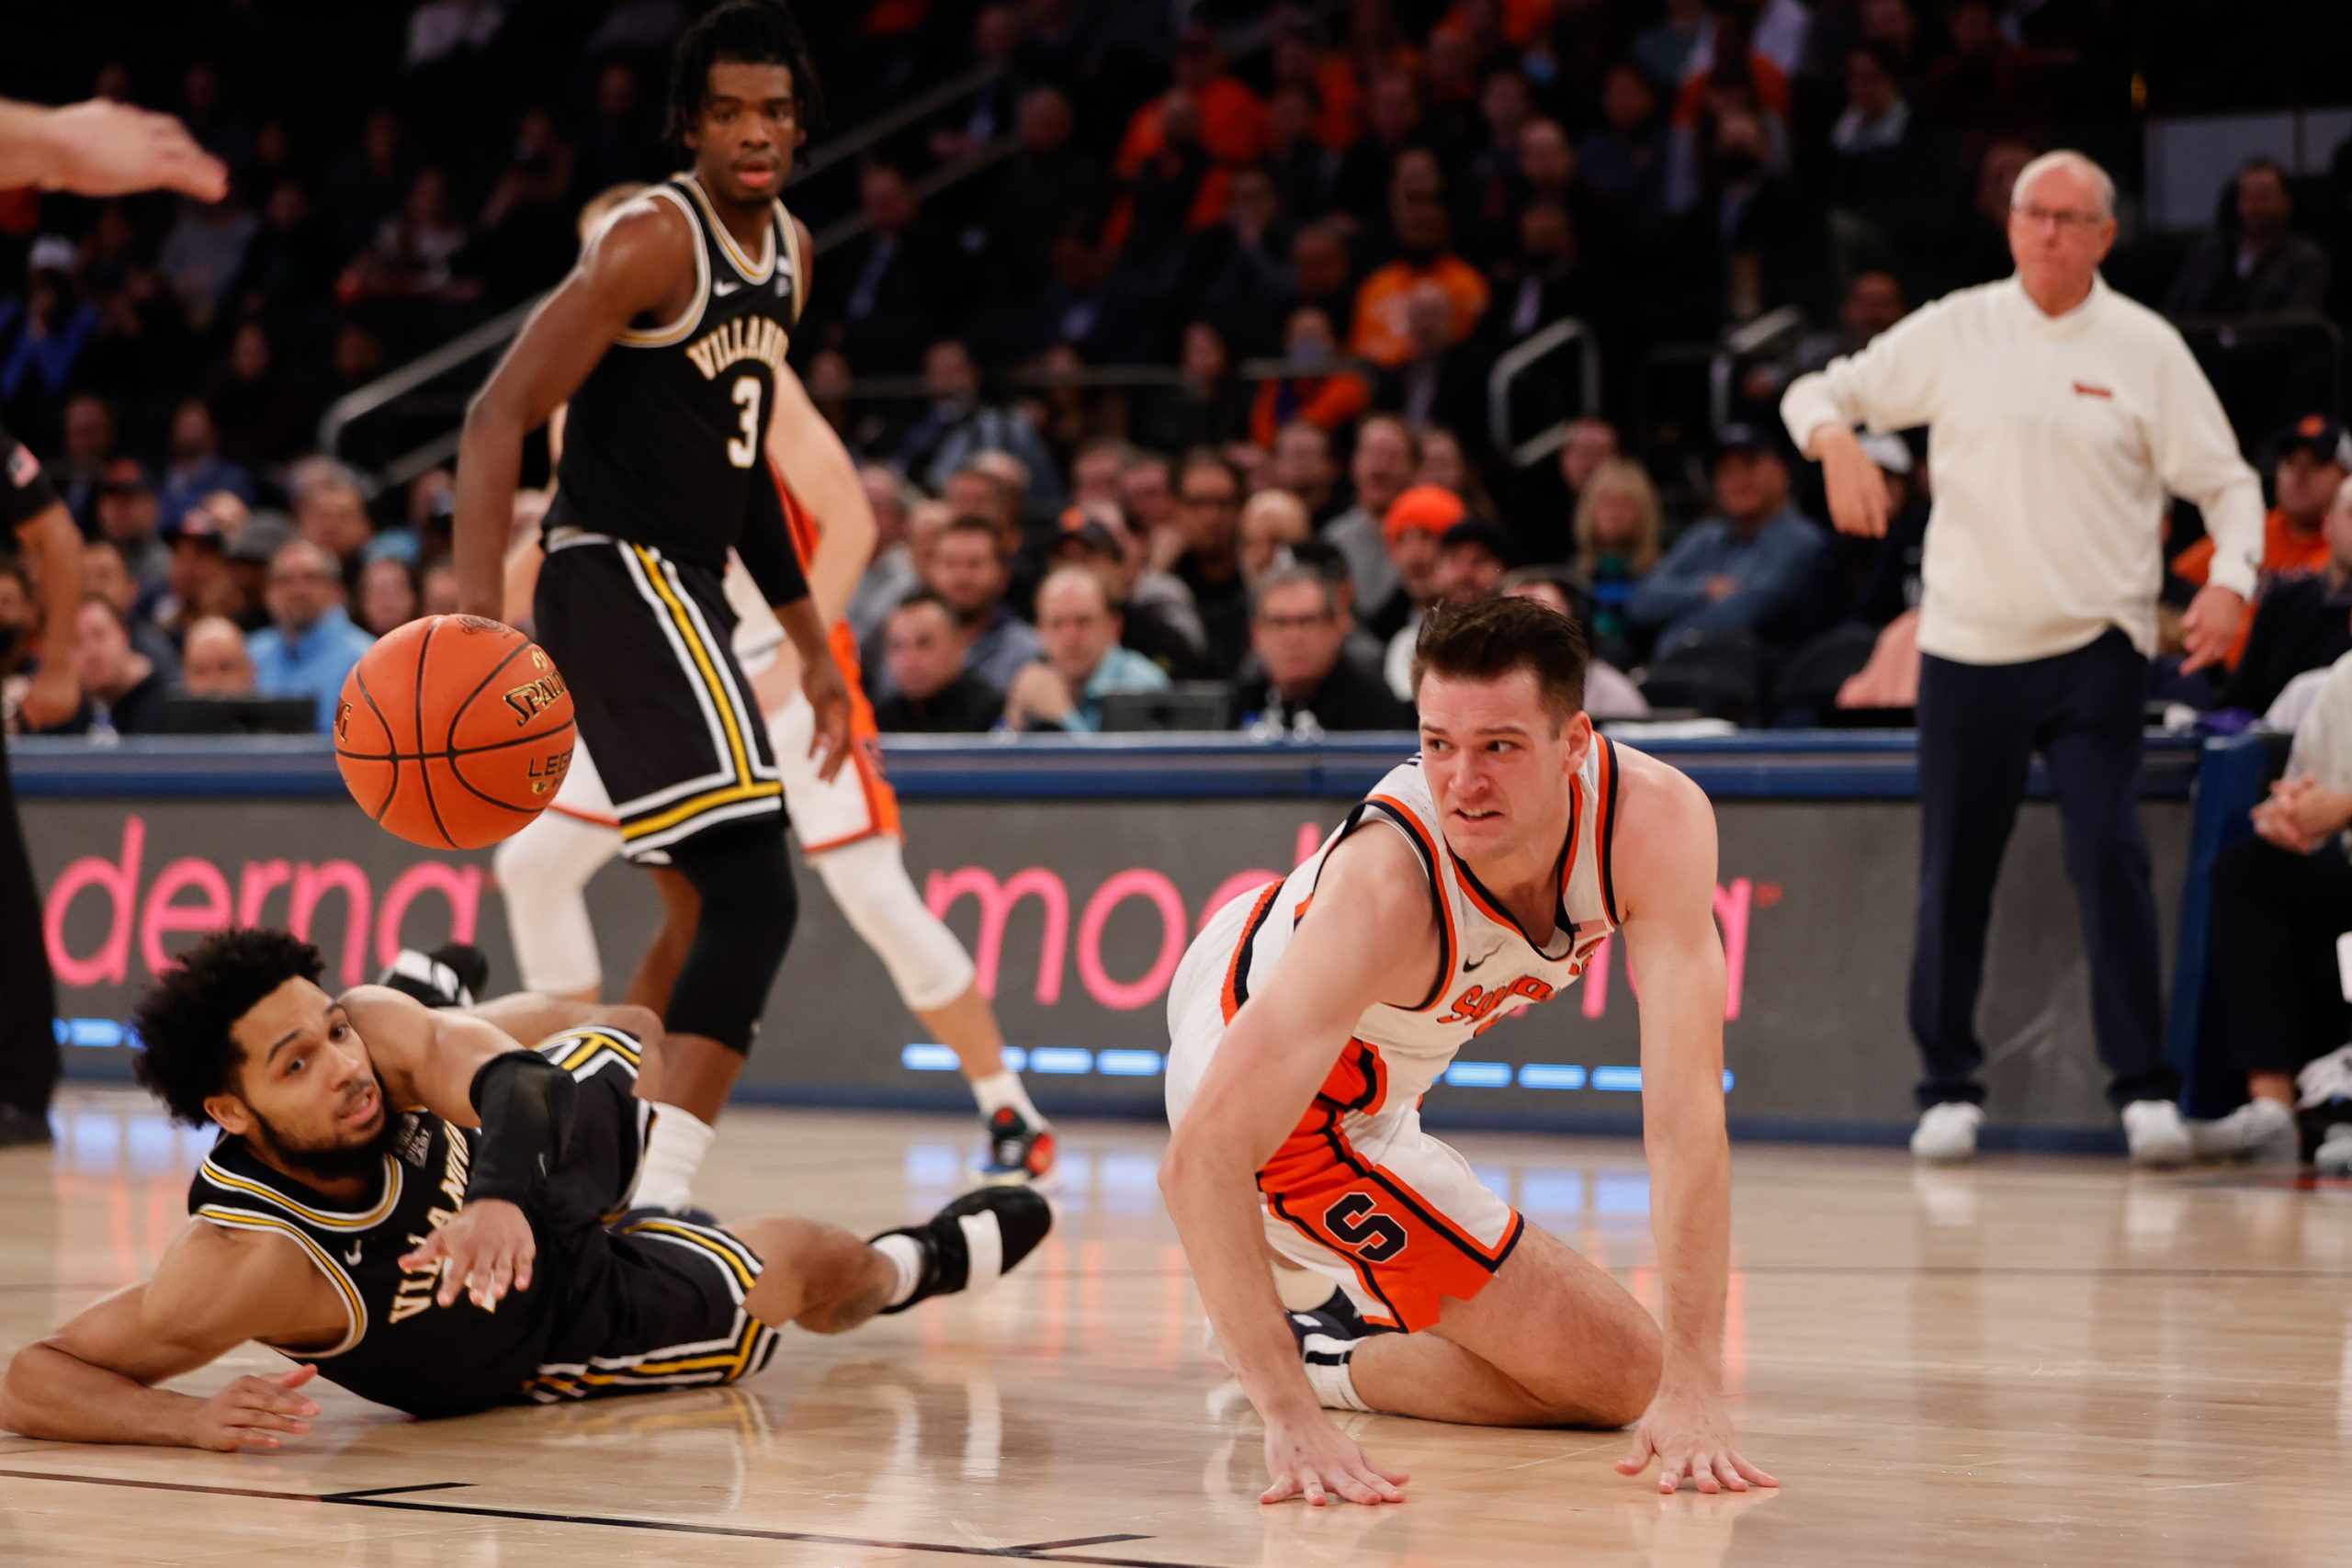 Jimmy Boeheim III scrambles against Villanova's Caleb Daniels for a loose ball during the Jimmy V Classic at Madison Square Garden on December 7, 2021. Syracuse Men's Basketball in action against Villanova during the Jimmy V Classic at Madison Square Garden on December 7, 2021